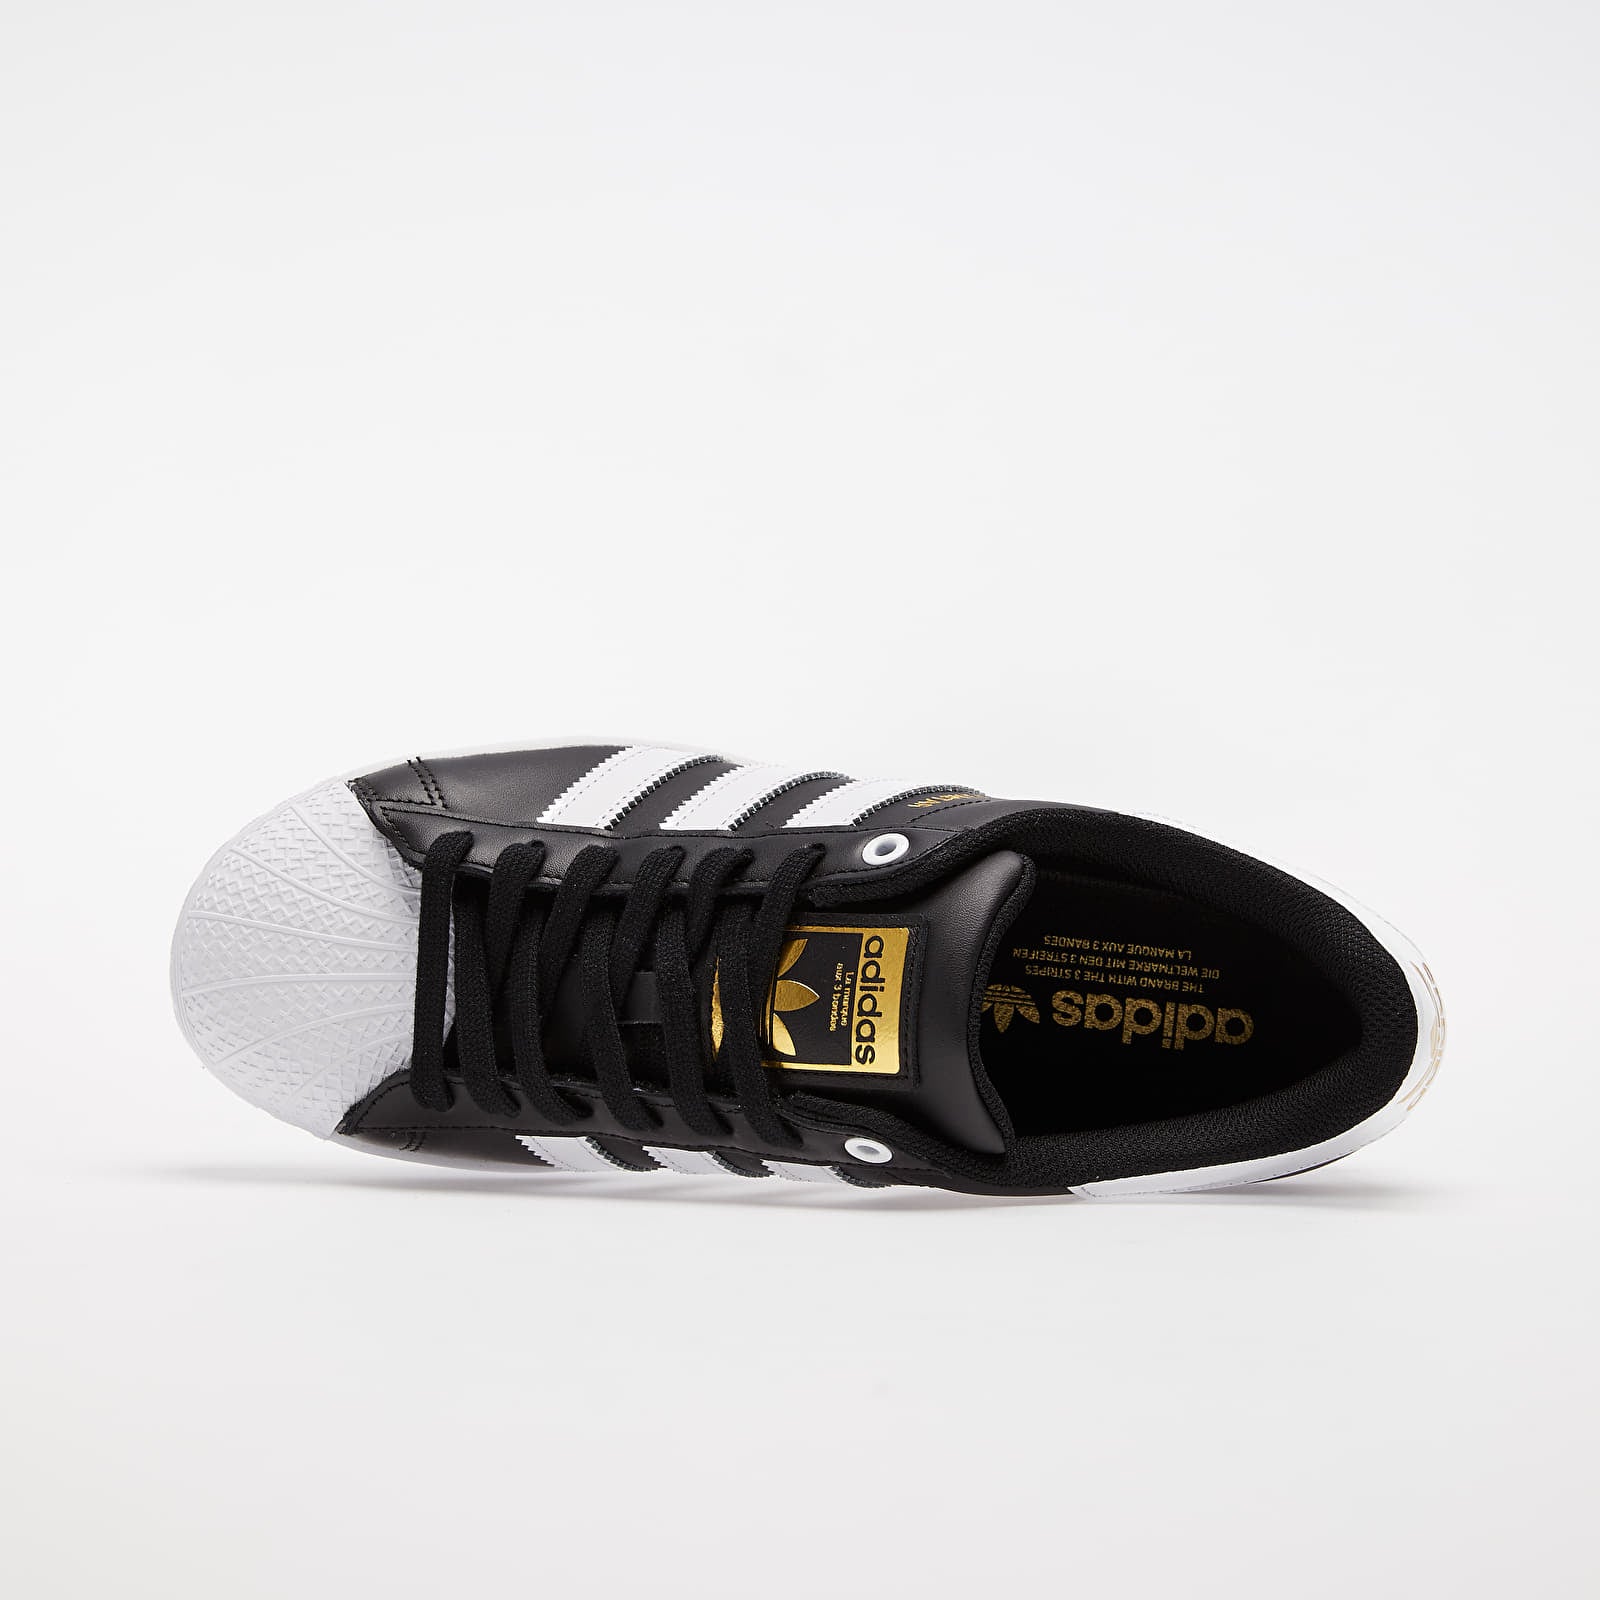 Adidas Bold – America Premium Outlets